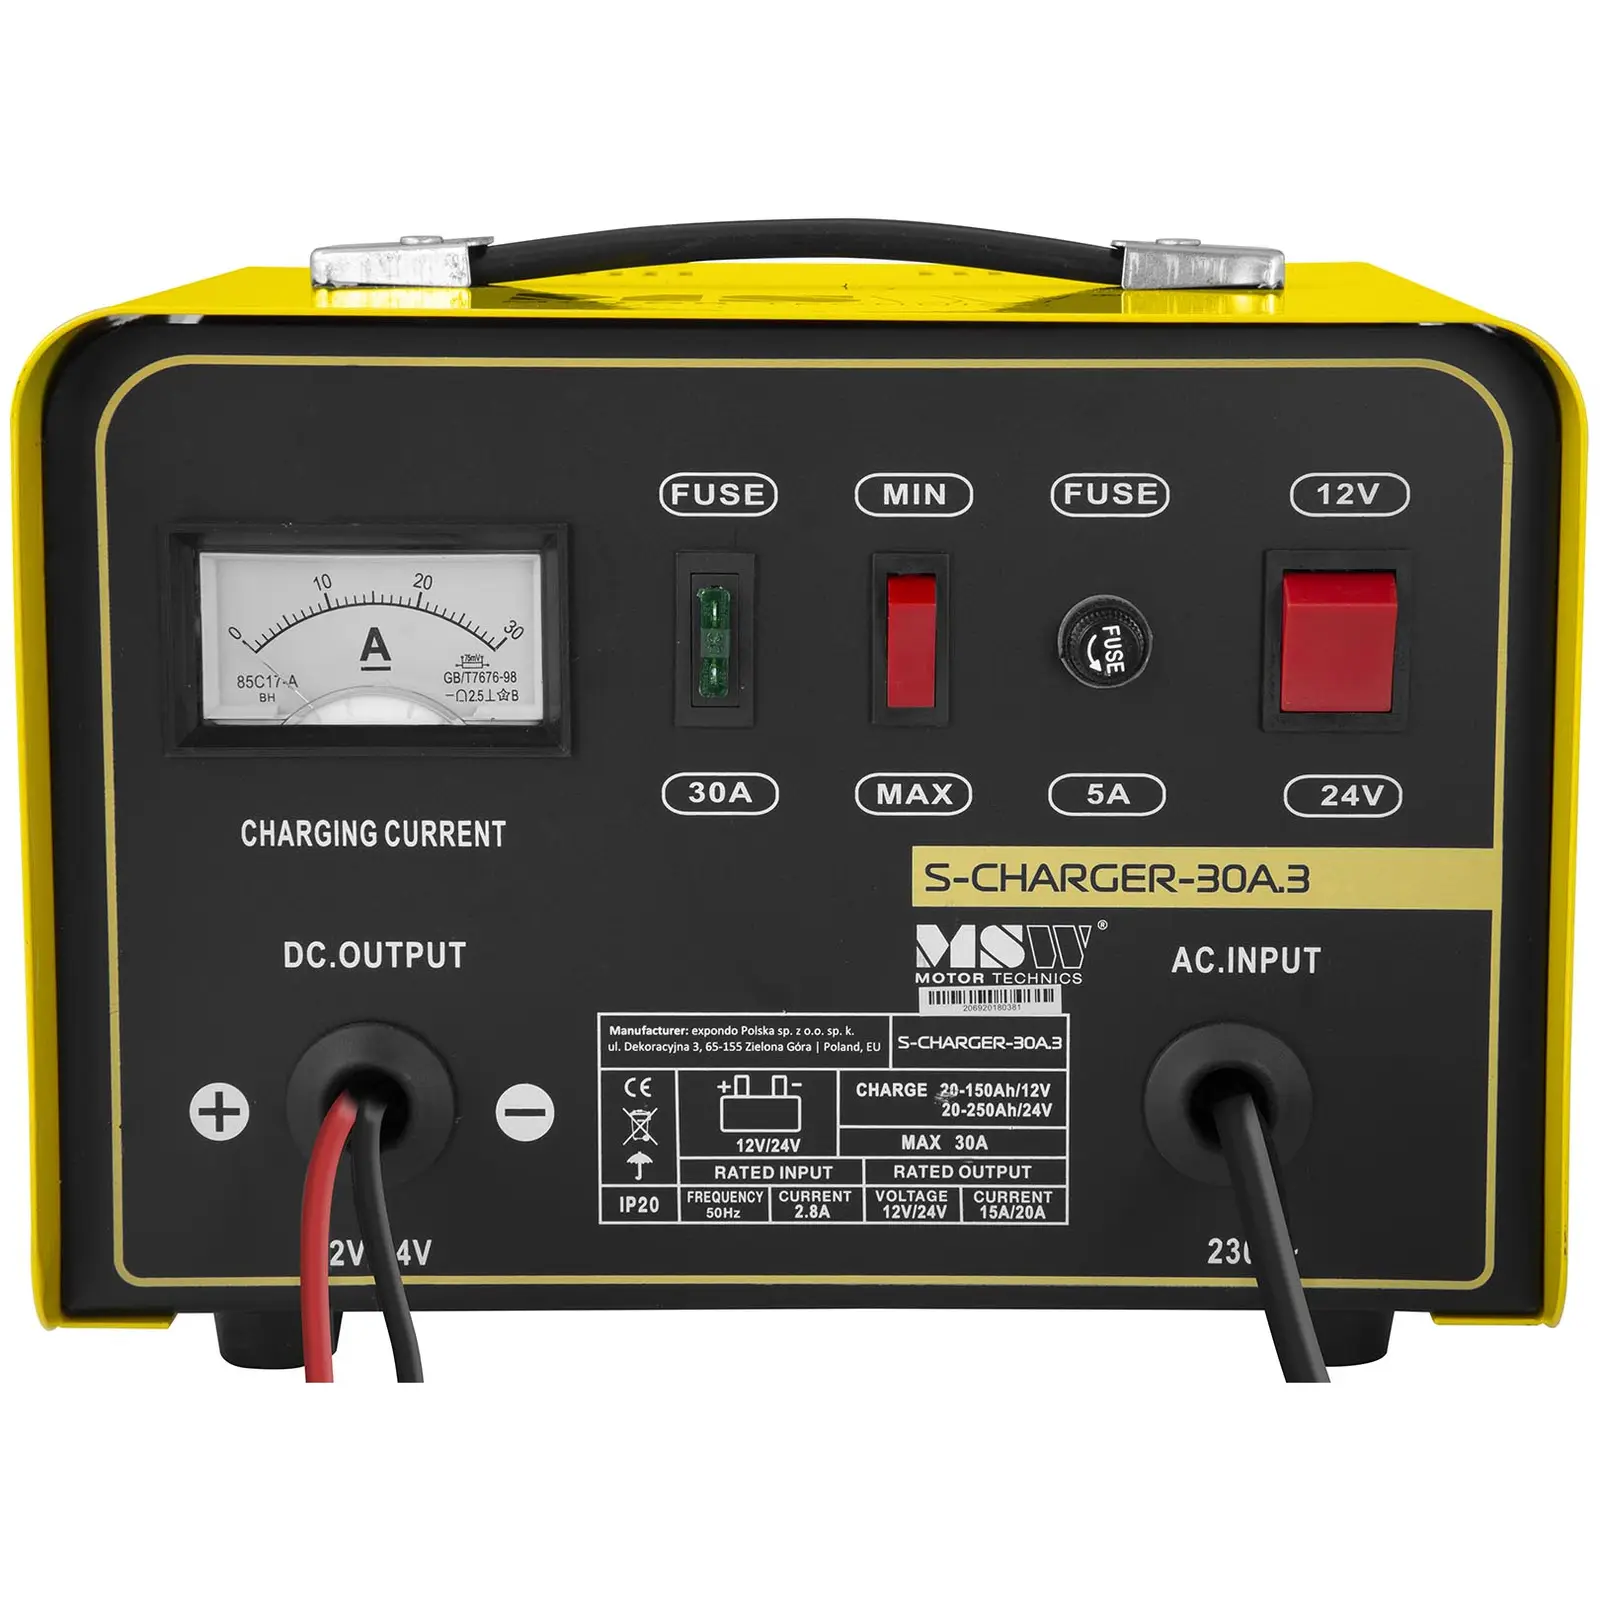 Heavy Duty Battery Charger - 12/24 V - 15/20 A